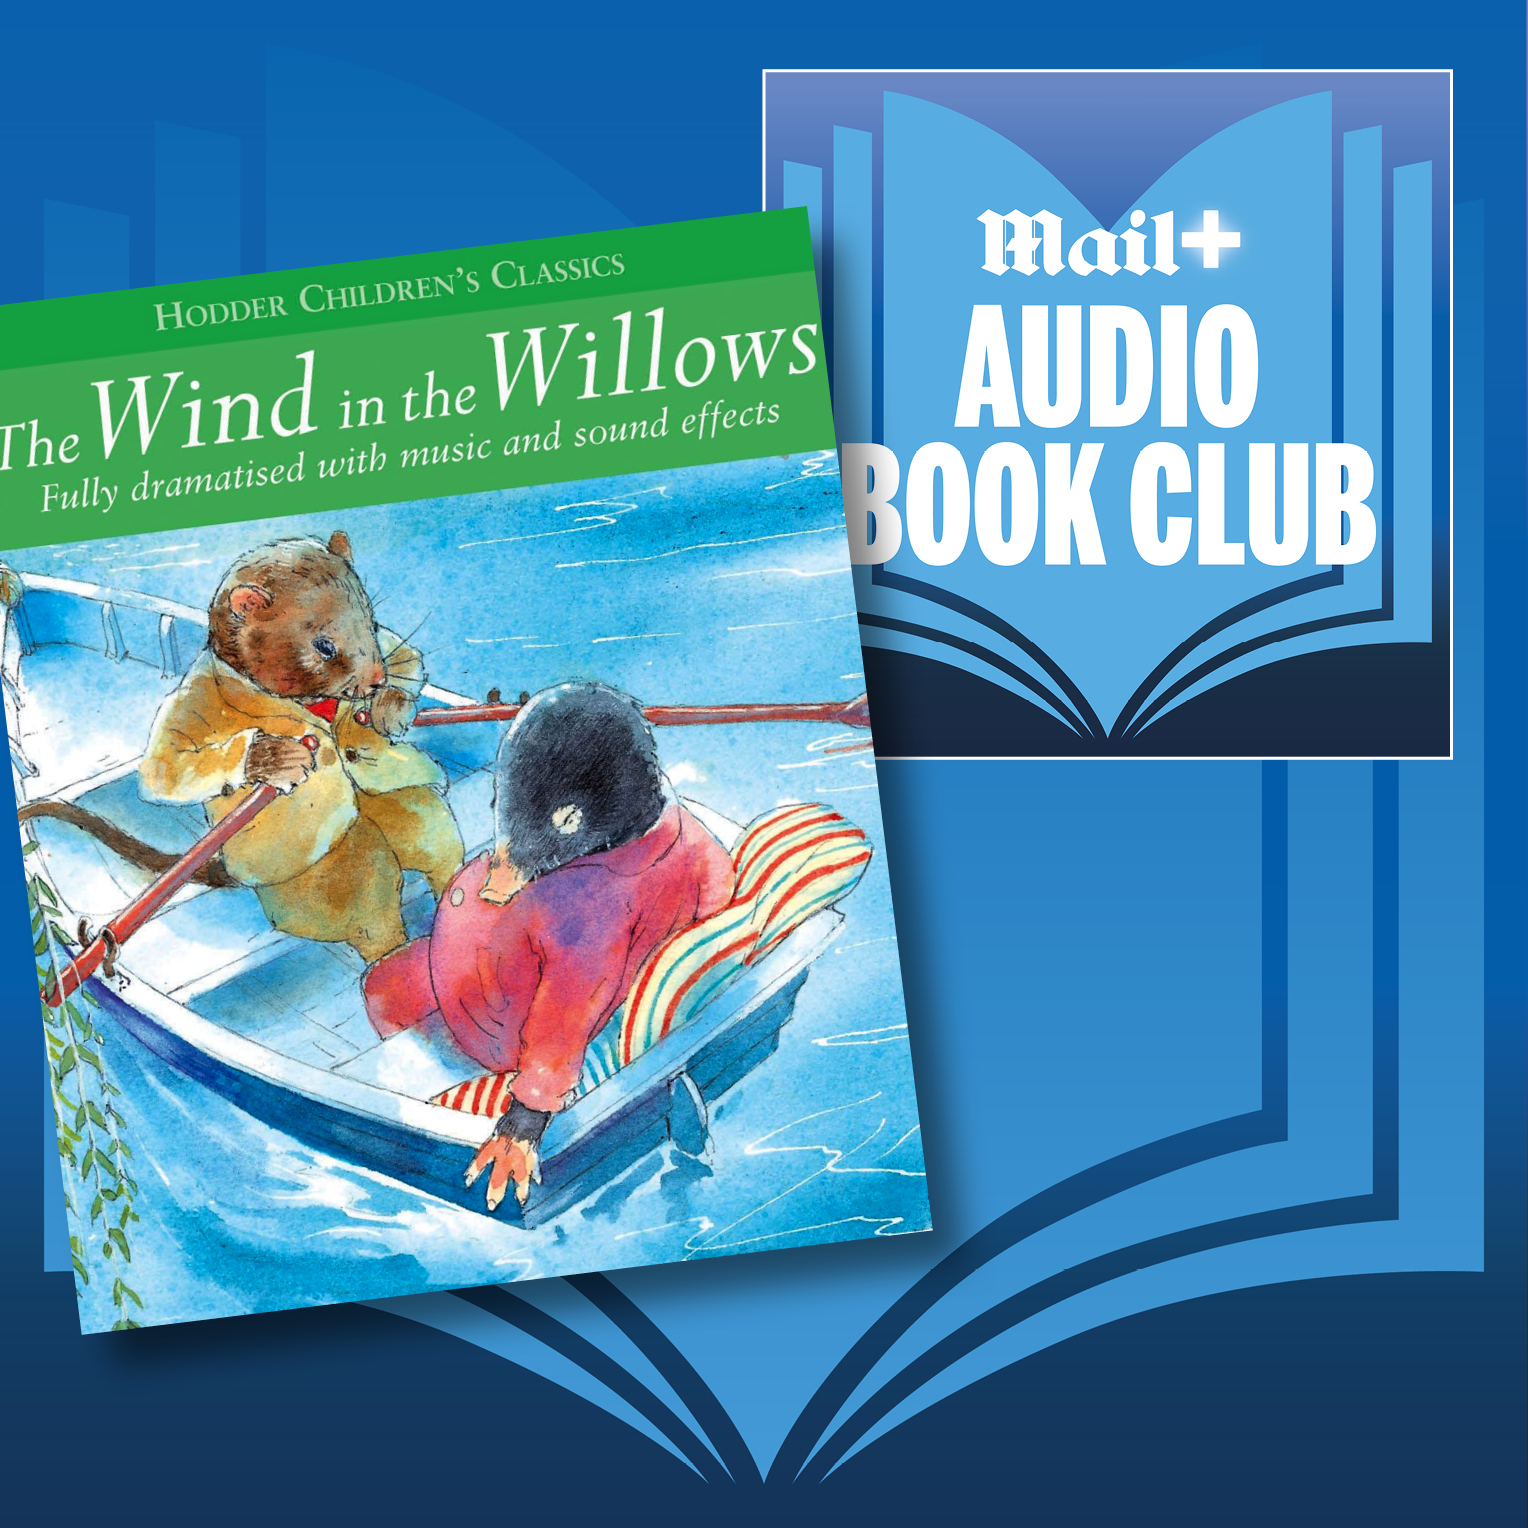 The Wind in the Willows by Kenneth Grahame from Mail+ Audio Book Club